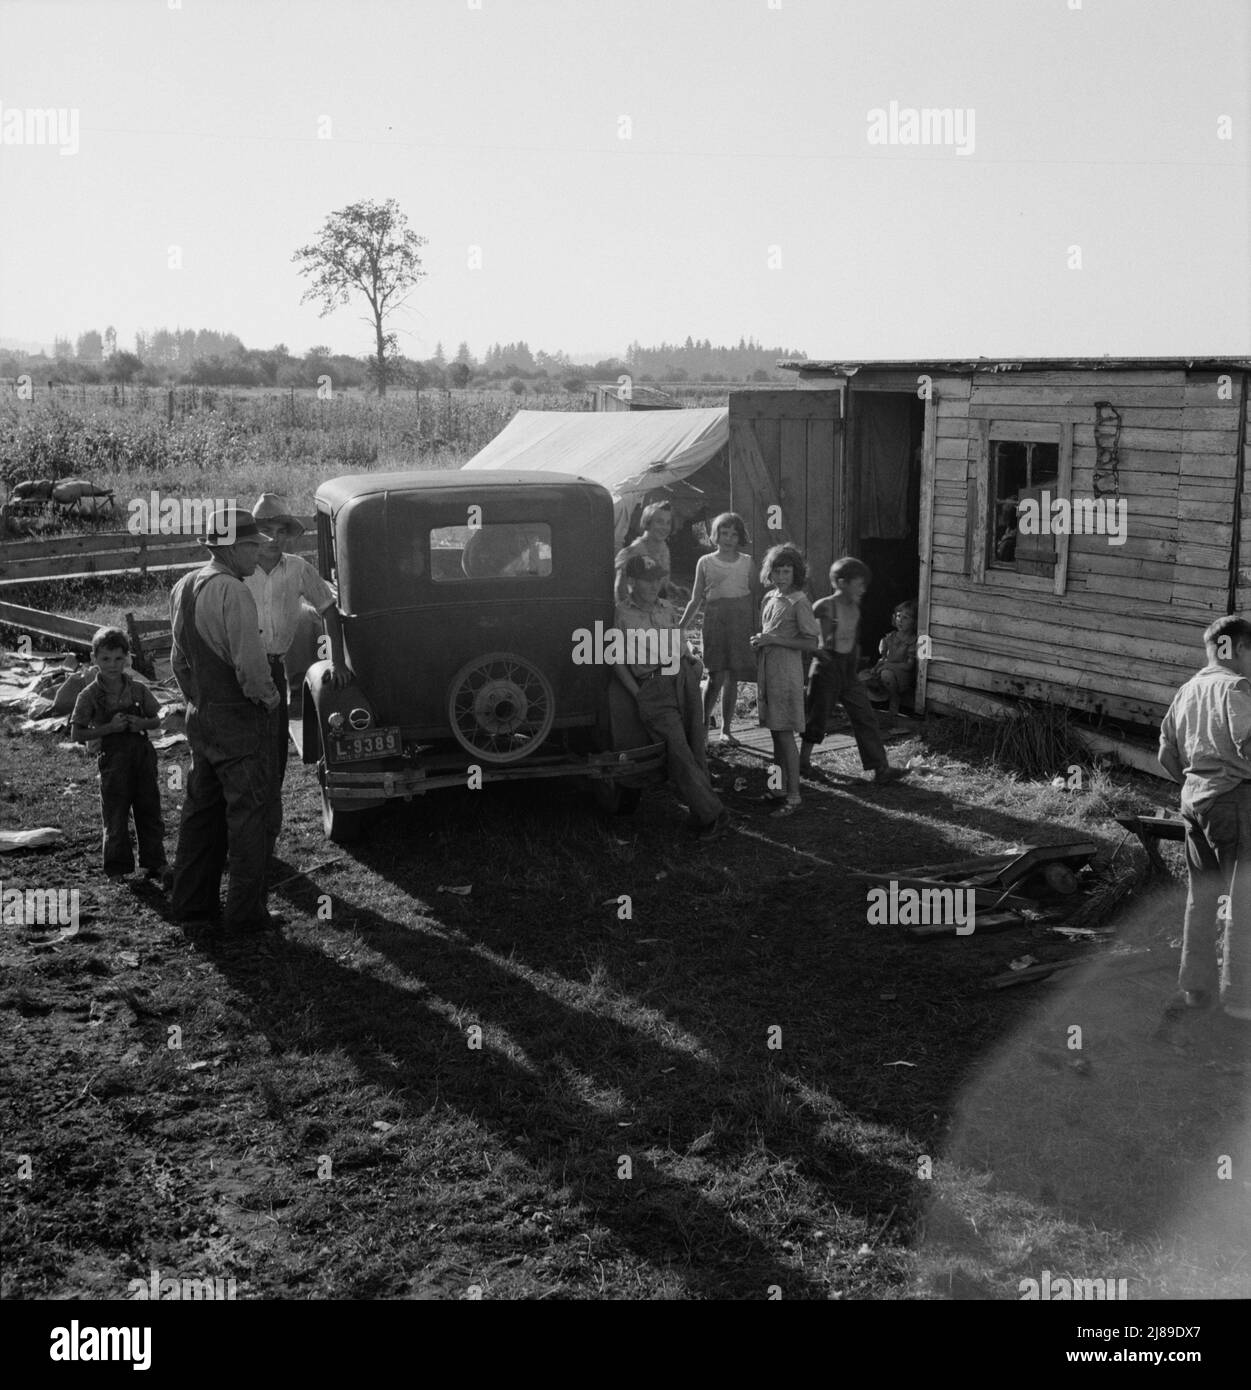 [Untitled, possibly related to: Oregon, Marion County, near West Stayton. Bean pickers' children in camp at end of day]. Stock Photo